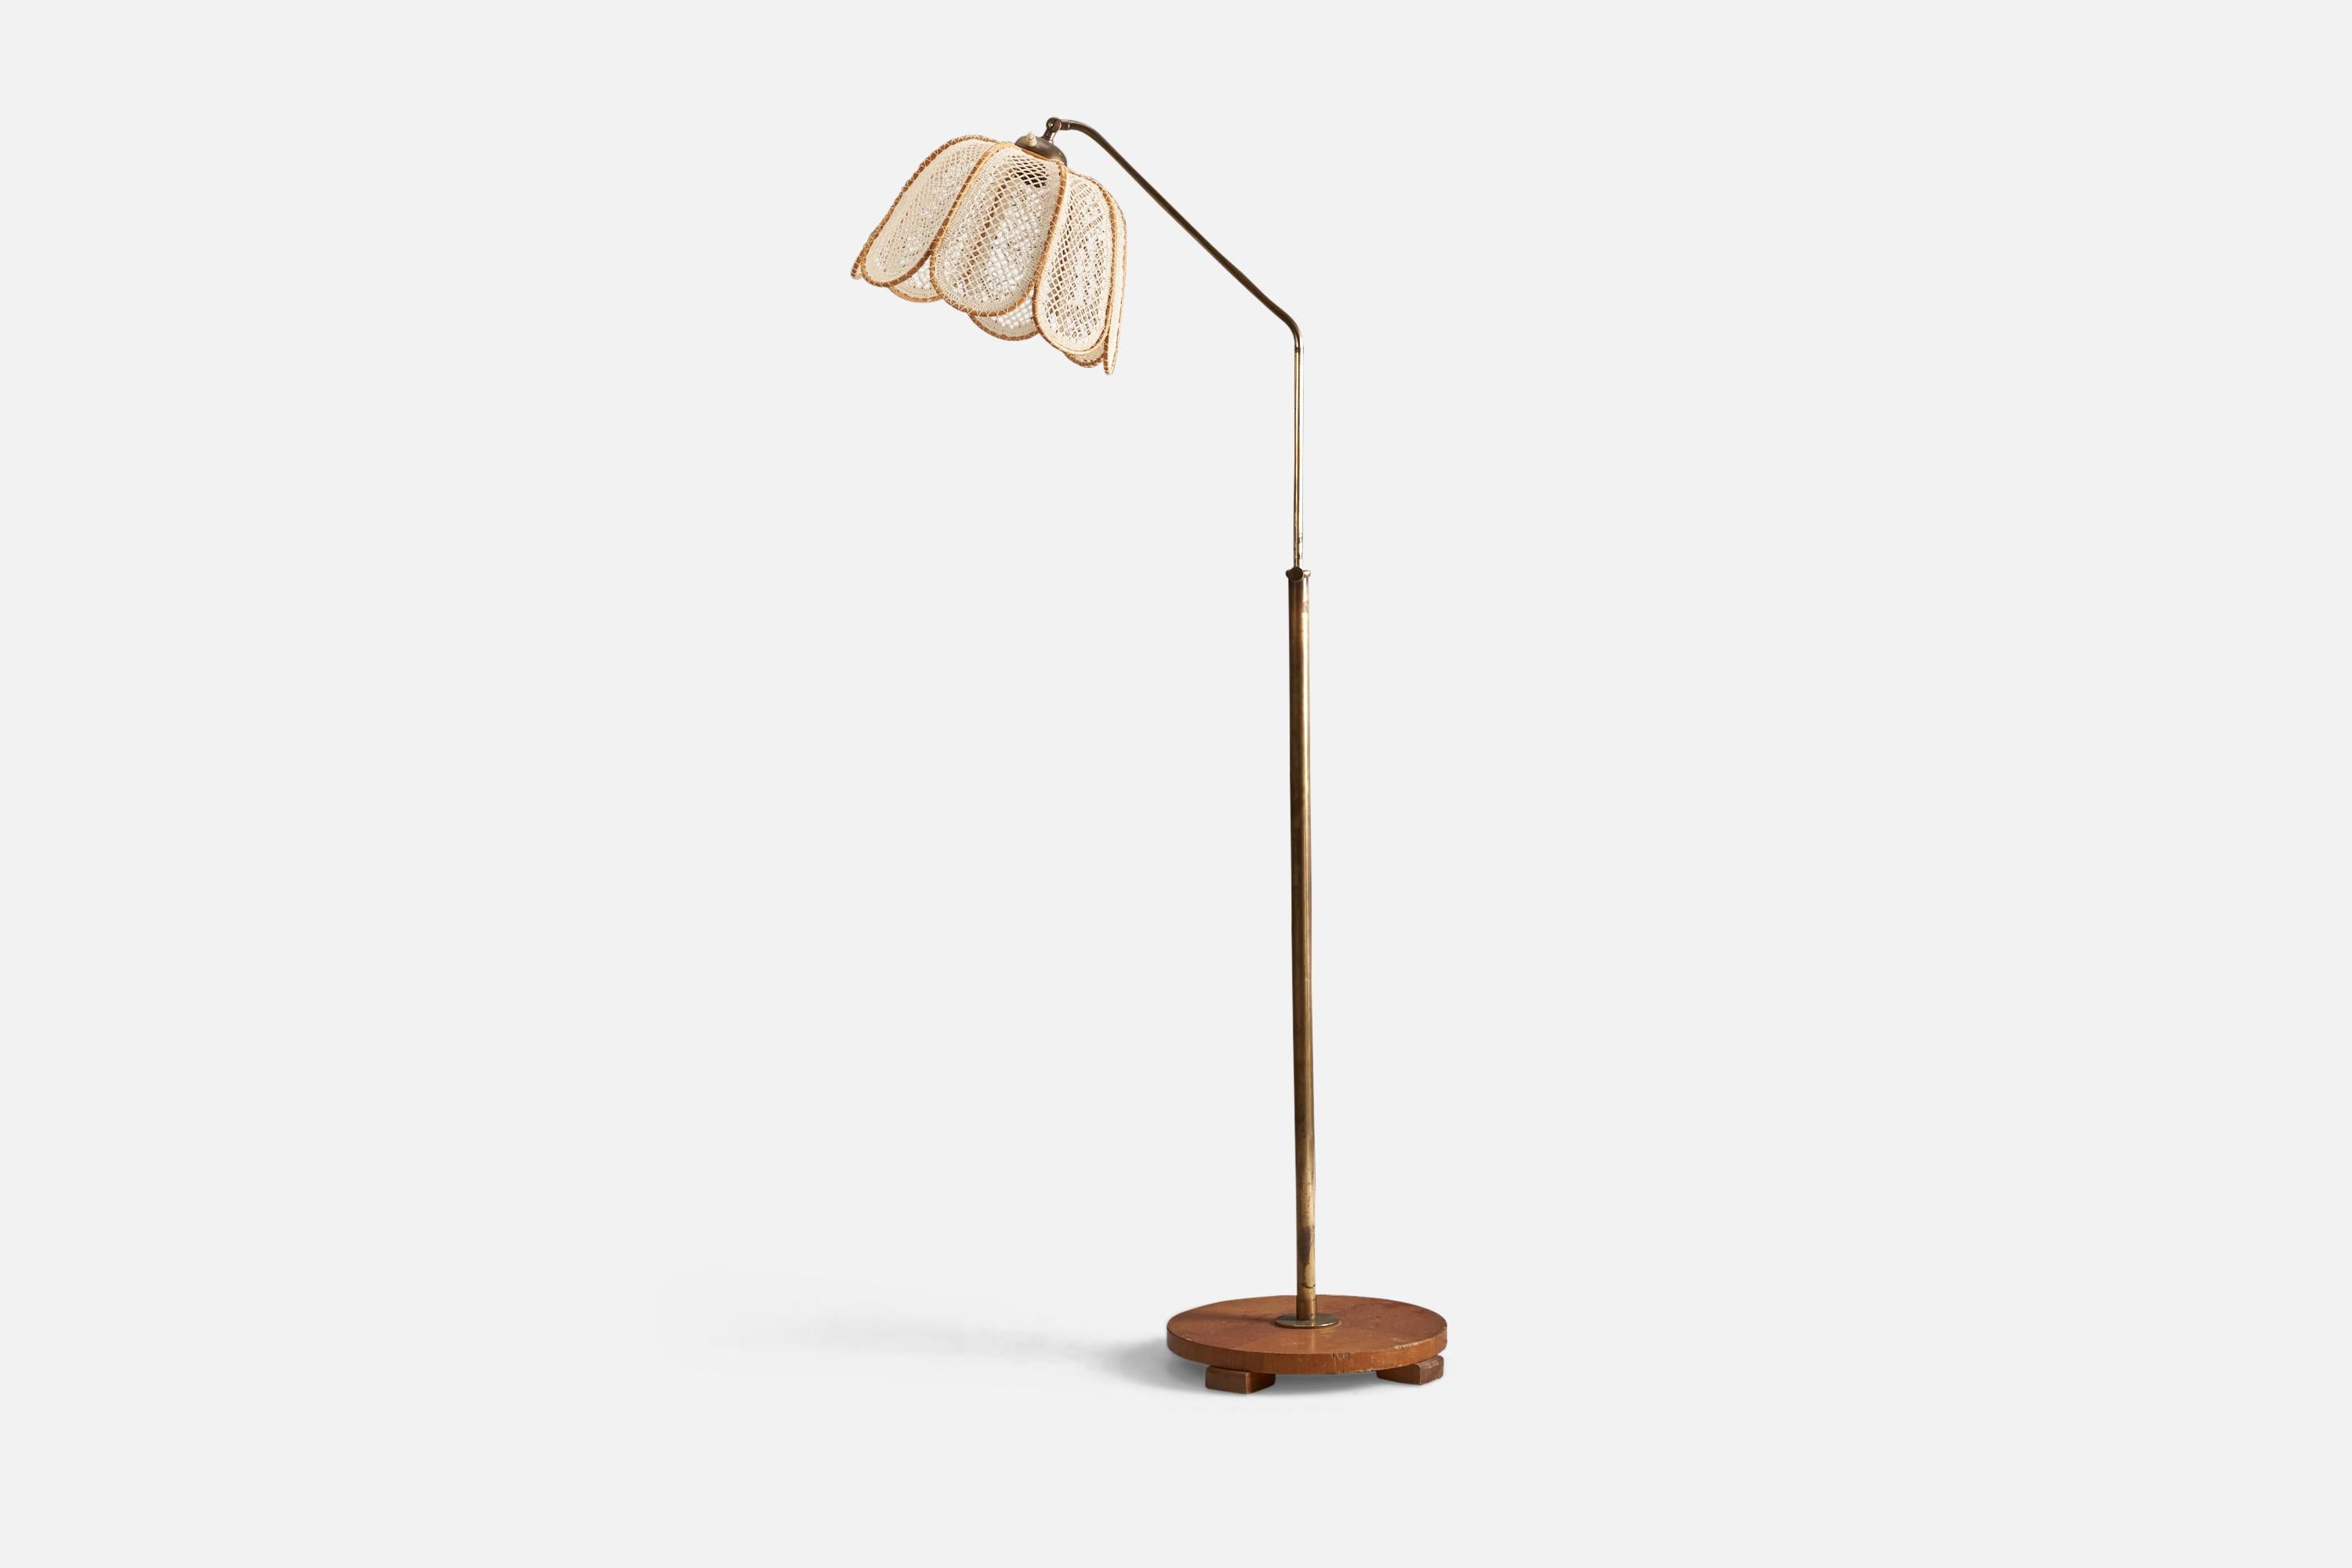 A brass, wood and embroidery fabric floor lamp designed and produced by a Swedish Designer, Sweden, 1940s.

Socket takes standard E-26 medium base bulb.

There is no maximum wattage stated on the fixture.